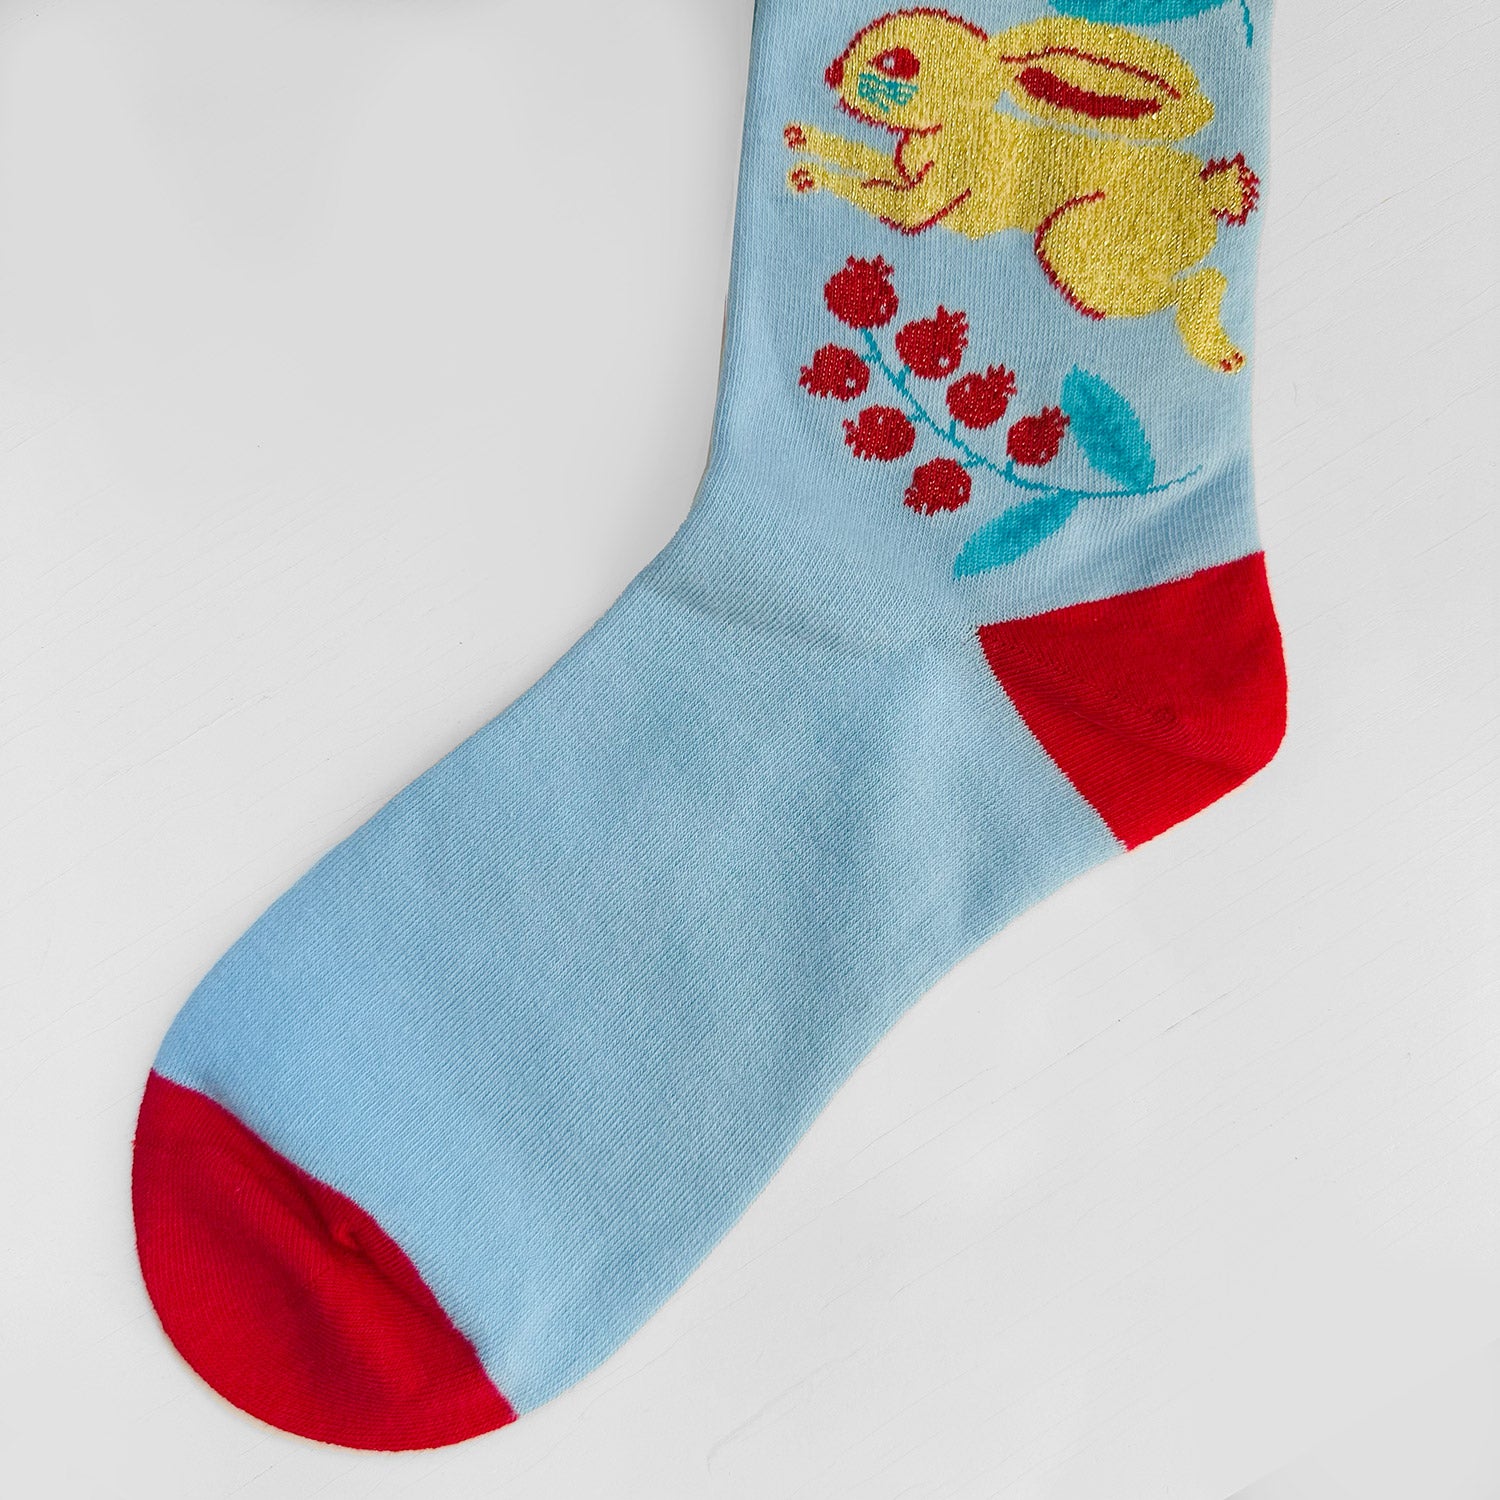 Blue and red sock with rabbit on it.